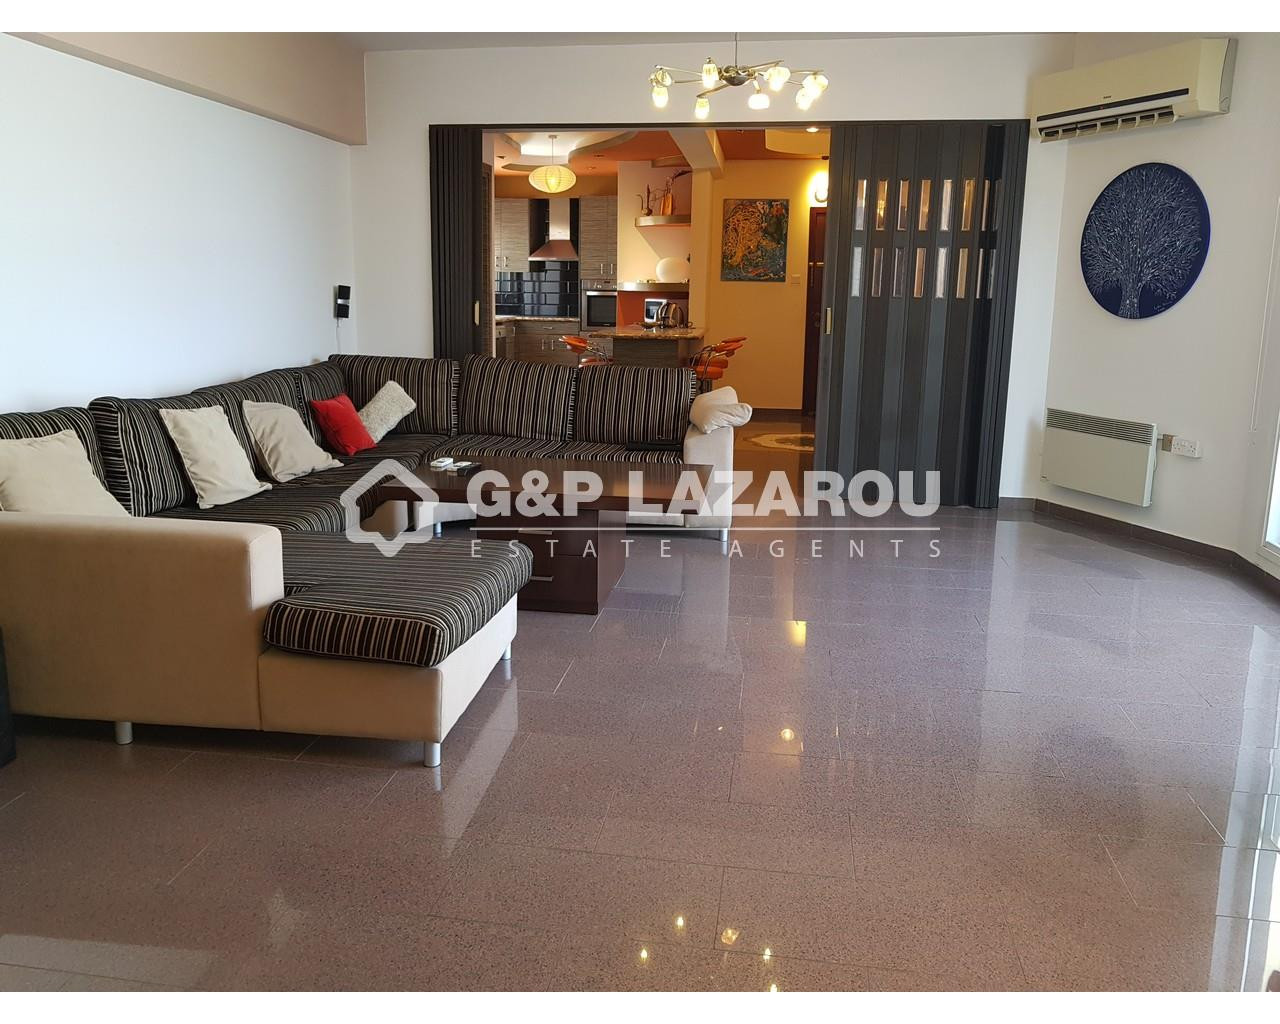 3 Bedroom Apartment for Sale in Famagusta – Agia Napa, Limassol District